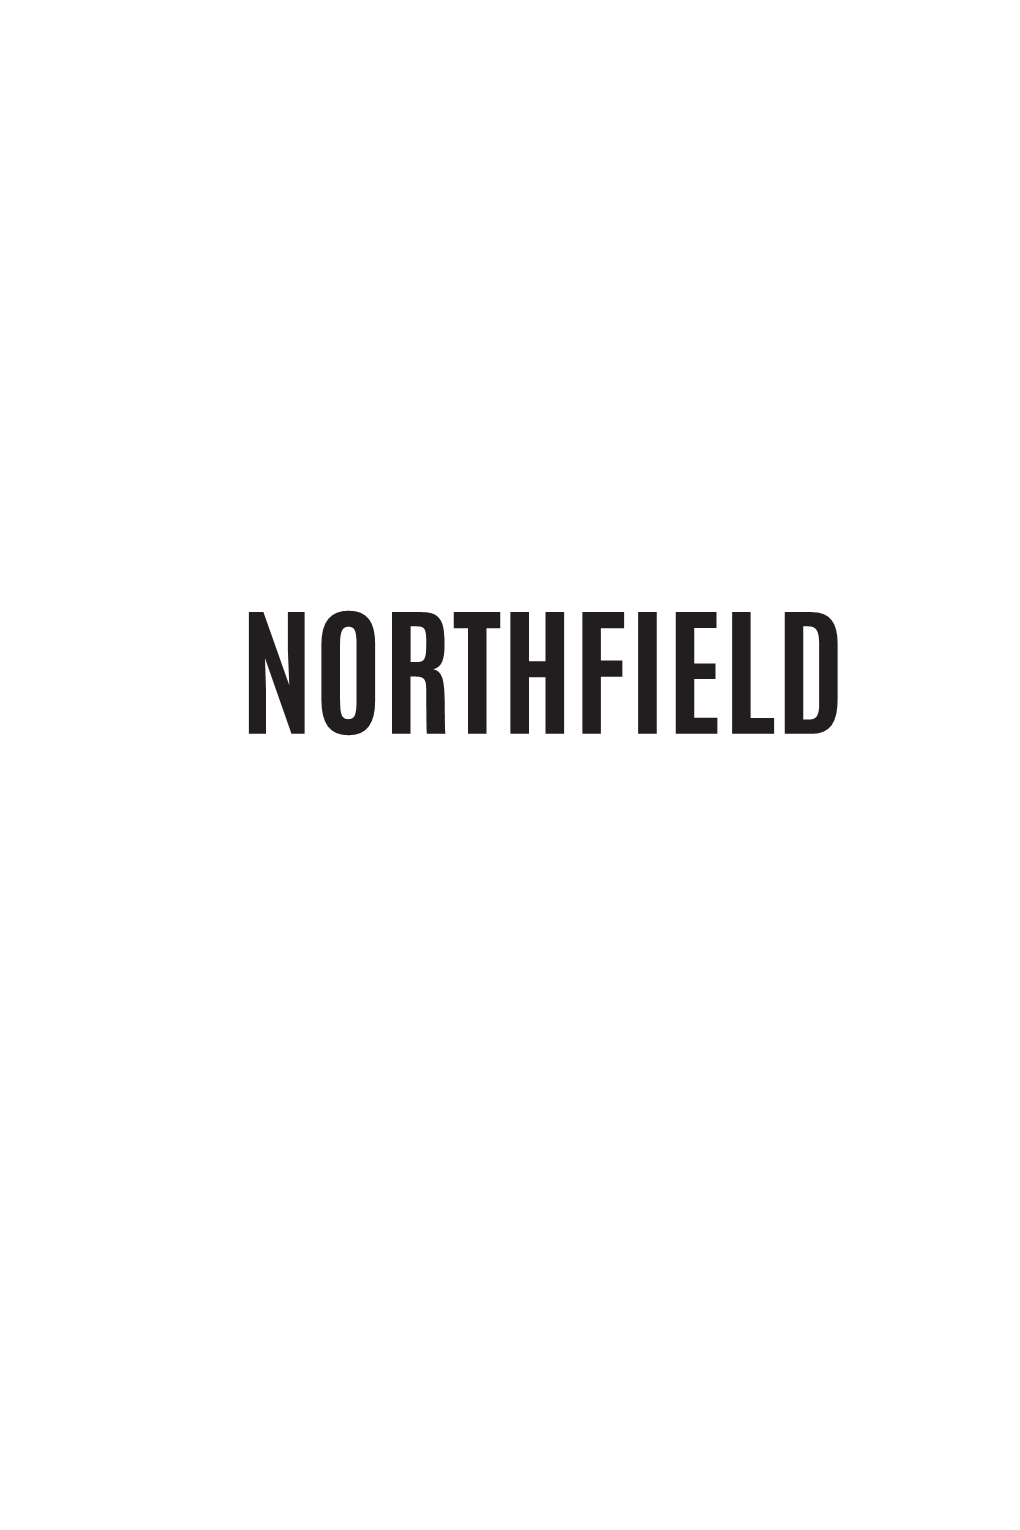 Northfield Preview